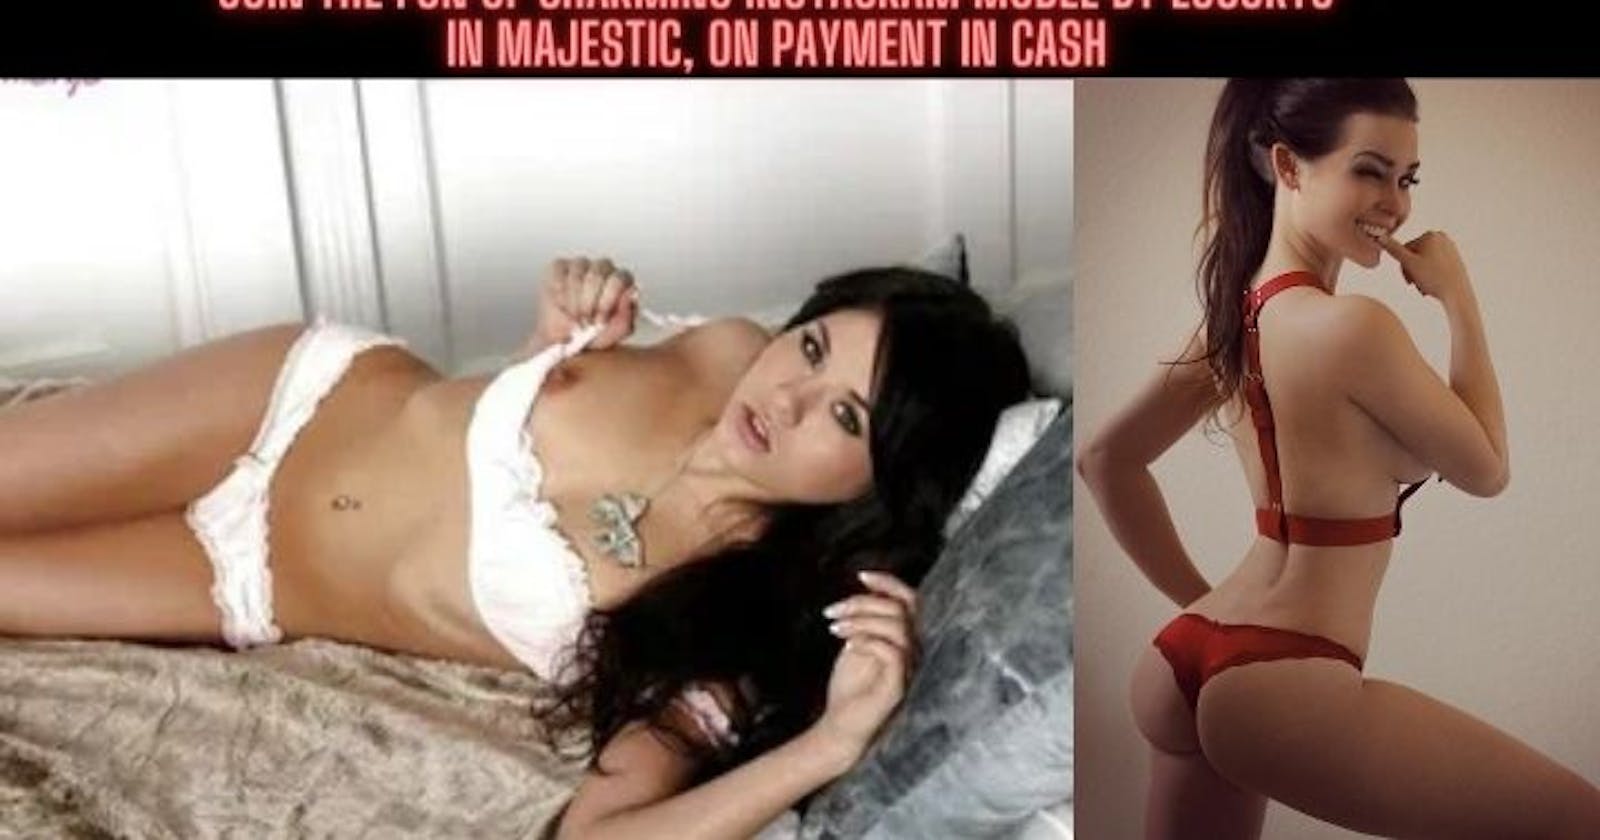 Join The Fun Of Charming Instagram Model By Escorts In Majestic, On Payment In Cash